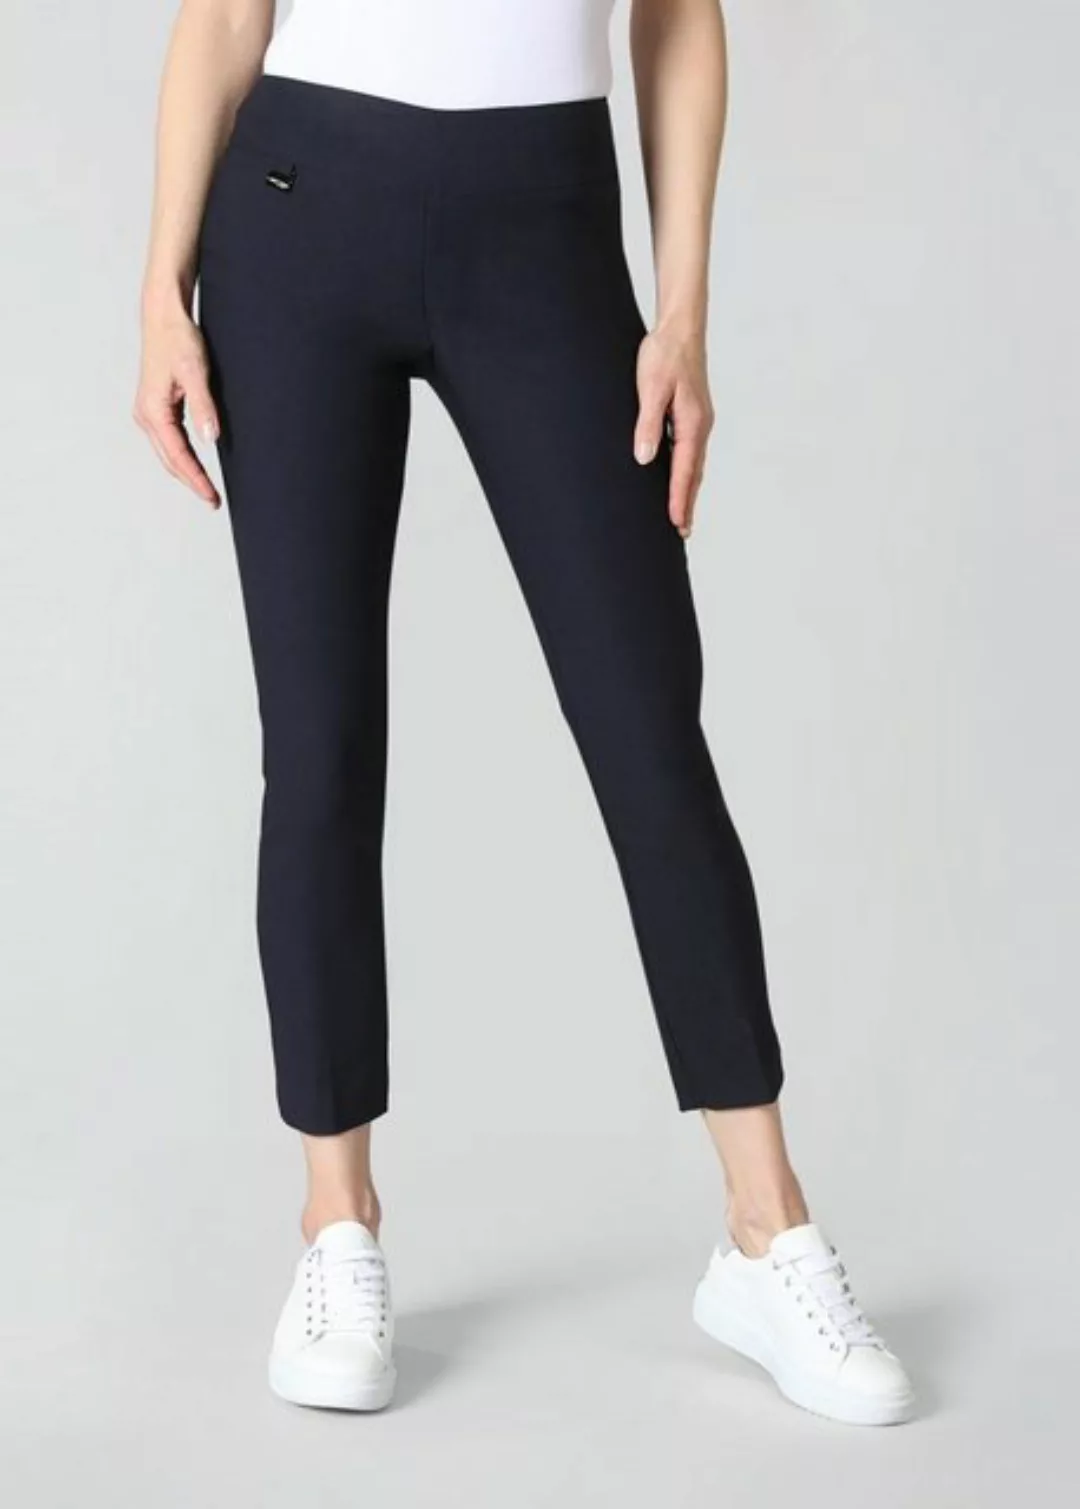 Lisette L Stoffhose Perfect fitting Magical Ankle Pants bequeme, höhere Tai günstig online kaufen